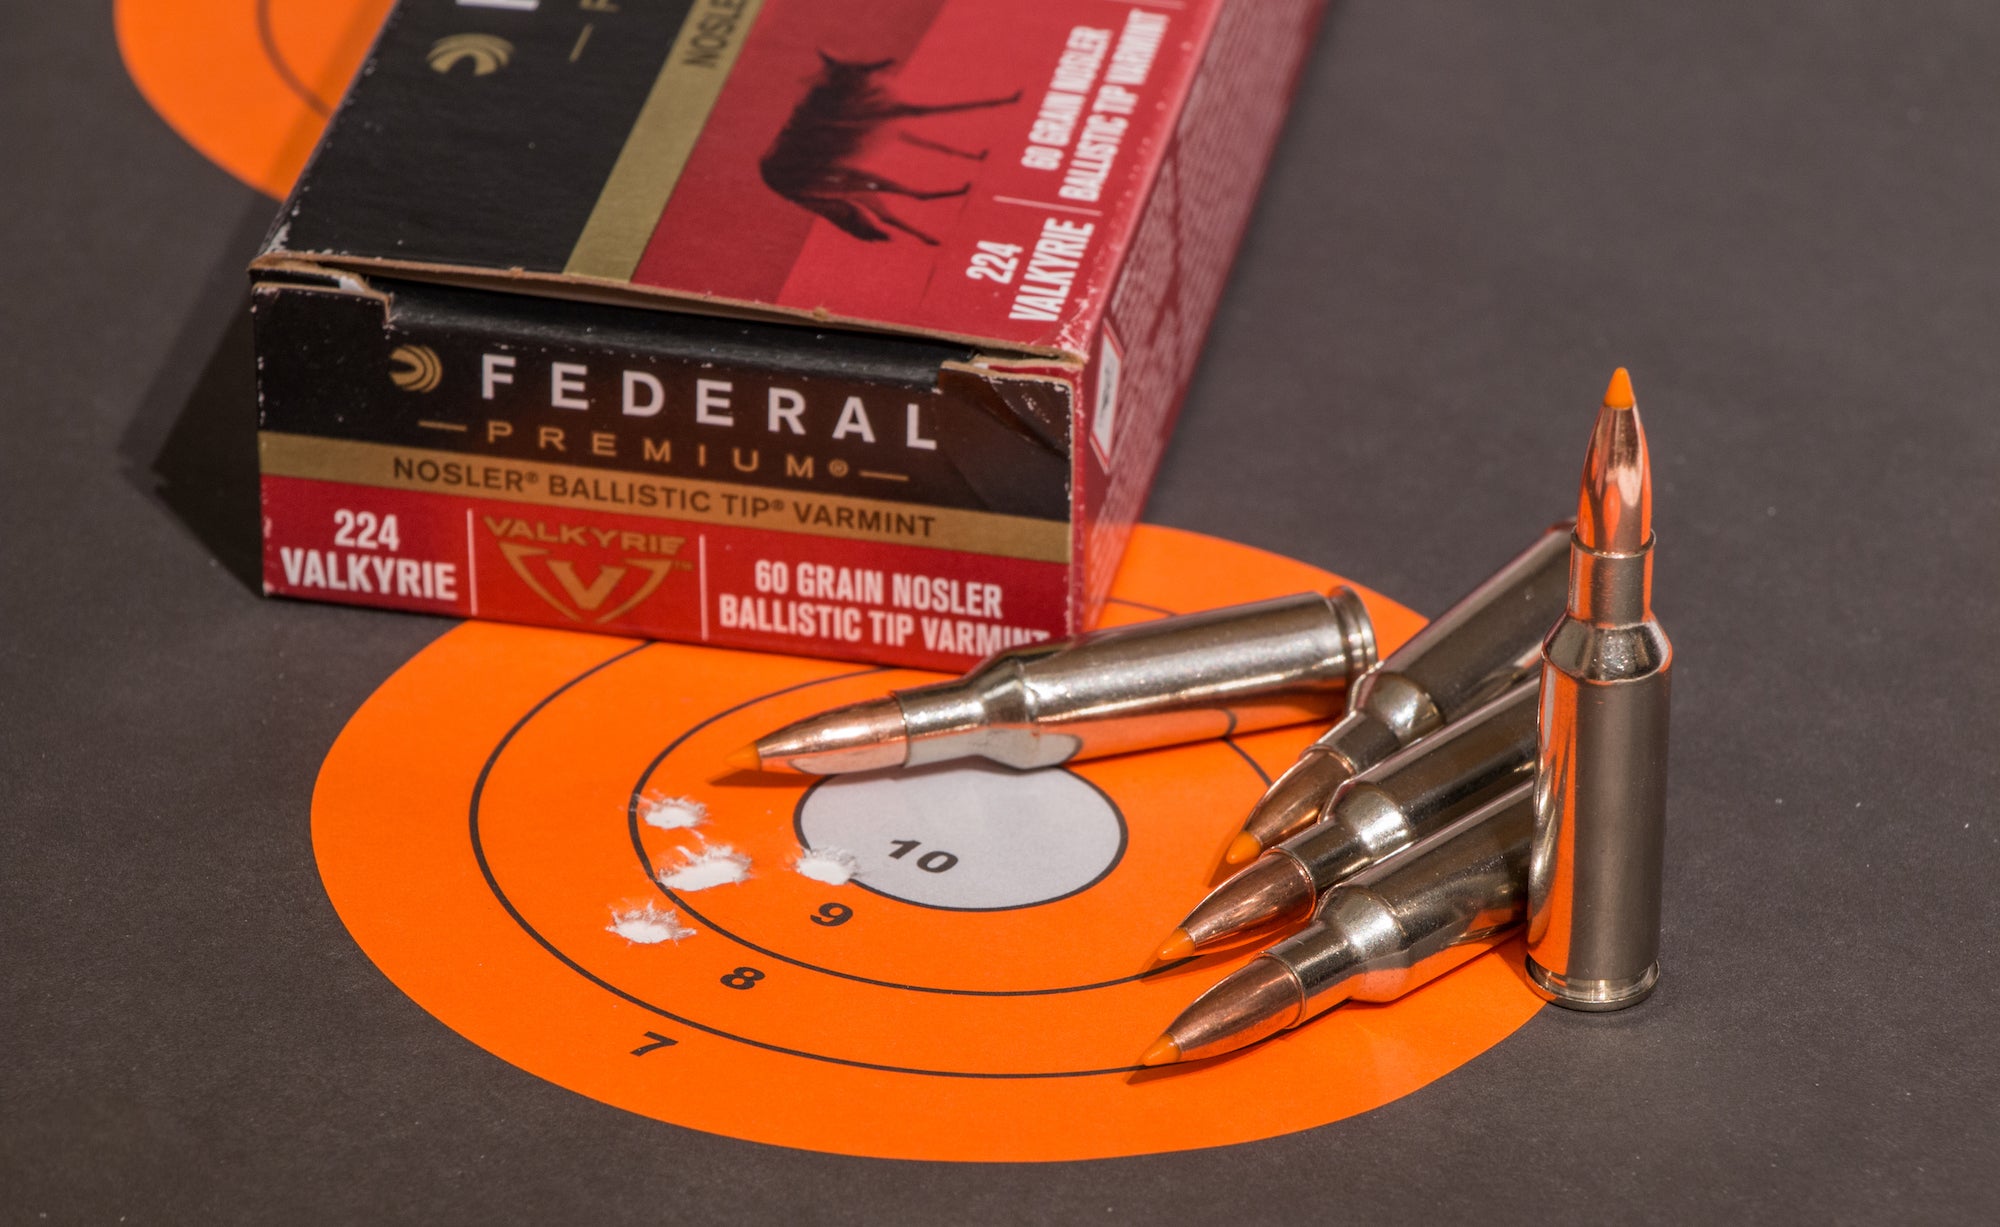 224 Valkyrie vs 223: Target with bullet holes and box of ammunition.